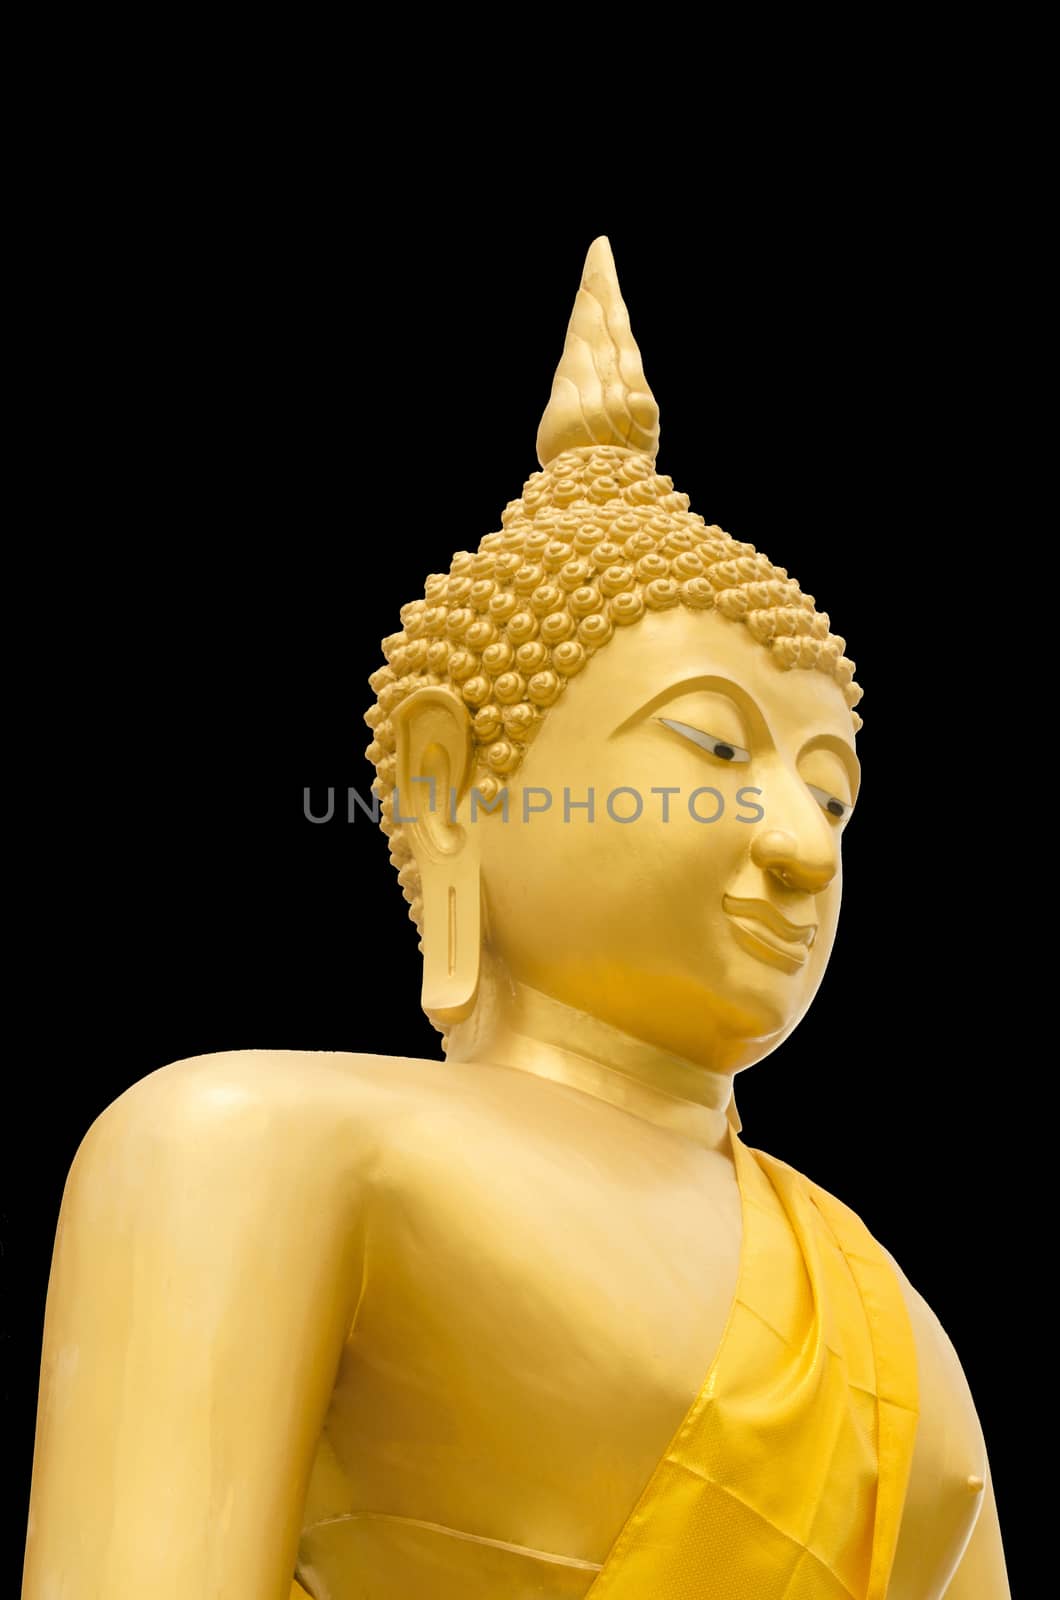 A image or Statue of Buddha that Seated in The attitude of meditation and Sitting cross-legs with one top of another.